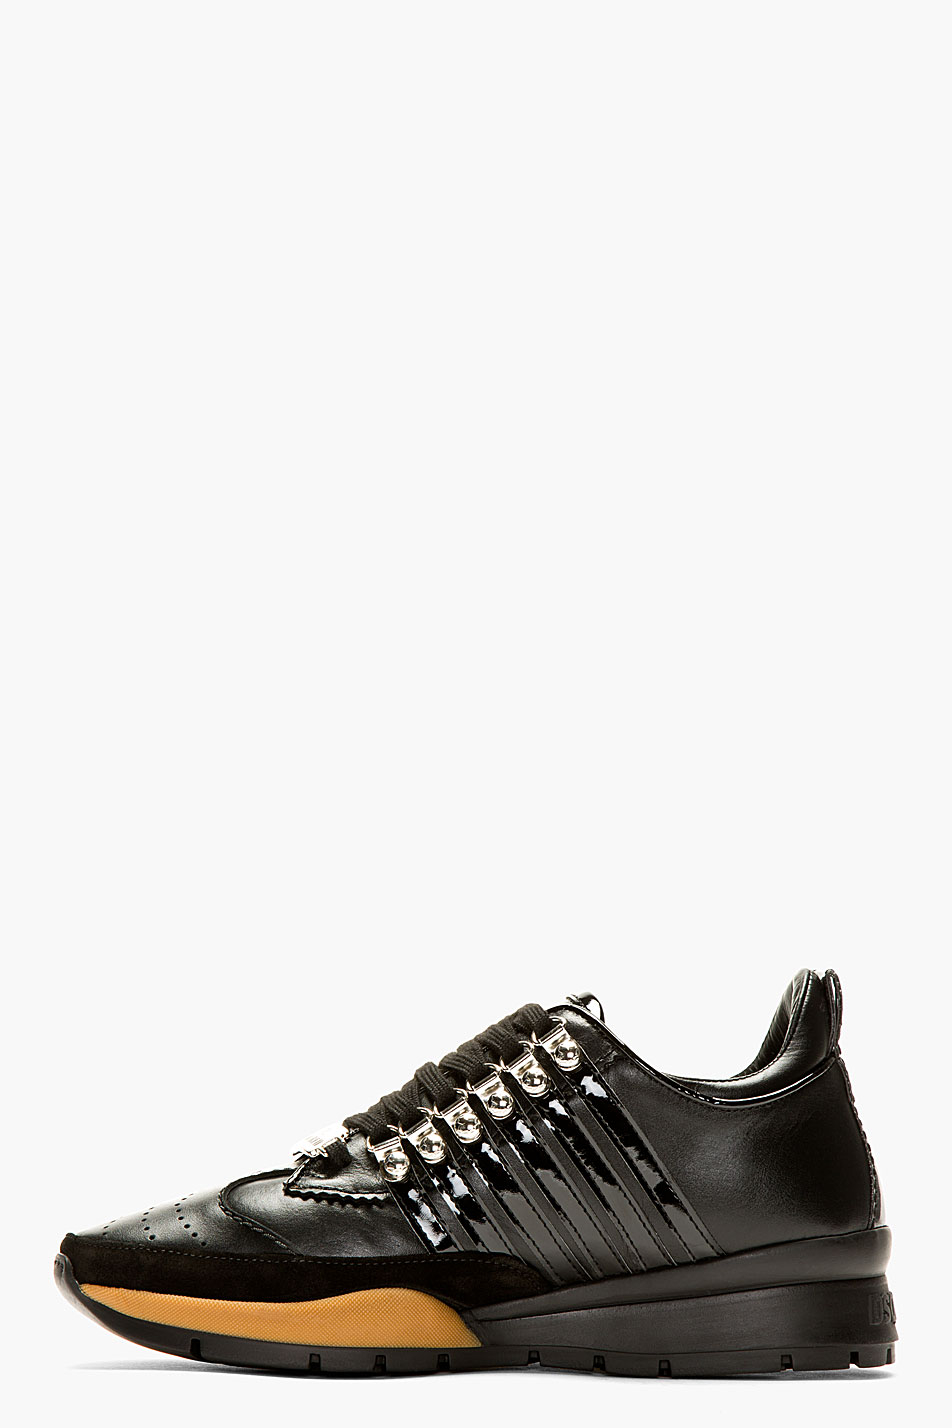 Lyst - Dsquared² Black Overlaced Kick It Sneakers in Black for Men